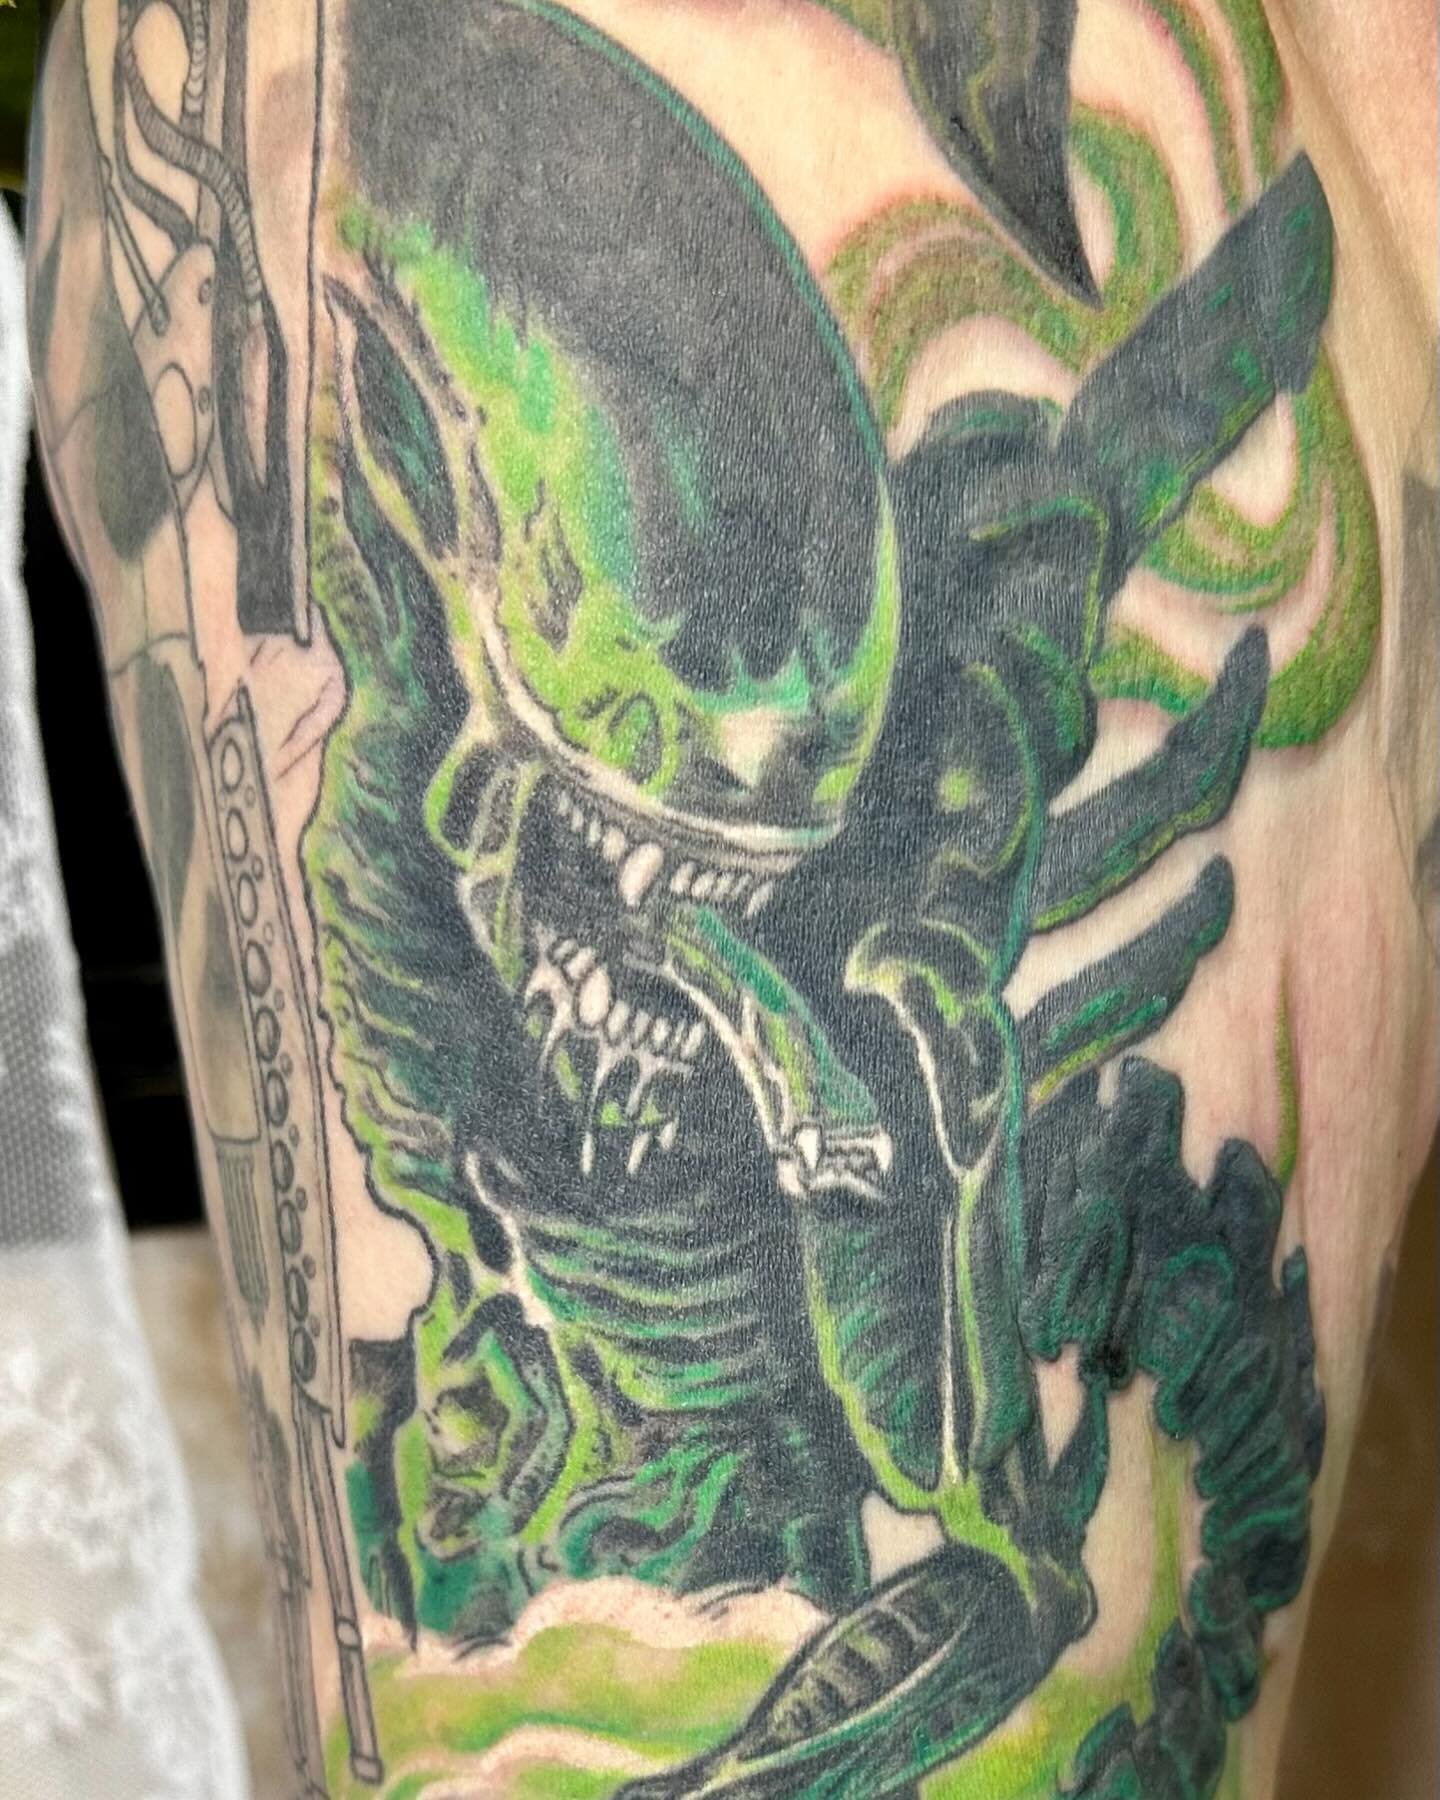 Happy xenomorph day! Don&rsquo;t forget to give your favorite a hug today. Tattoos by Sandy and Ingrid. Plushes also by Ingrid. @gullstein.art #sandybrudviktattoo #letsbuzz #letsbuzztattoo #letsbuzzbergen #bergen #norwegiantattooers #xenomorph #xenom